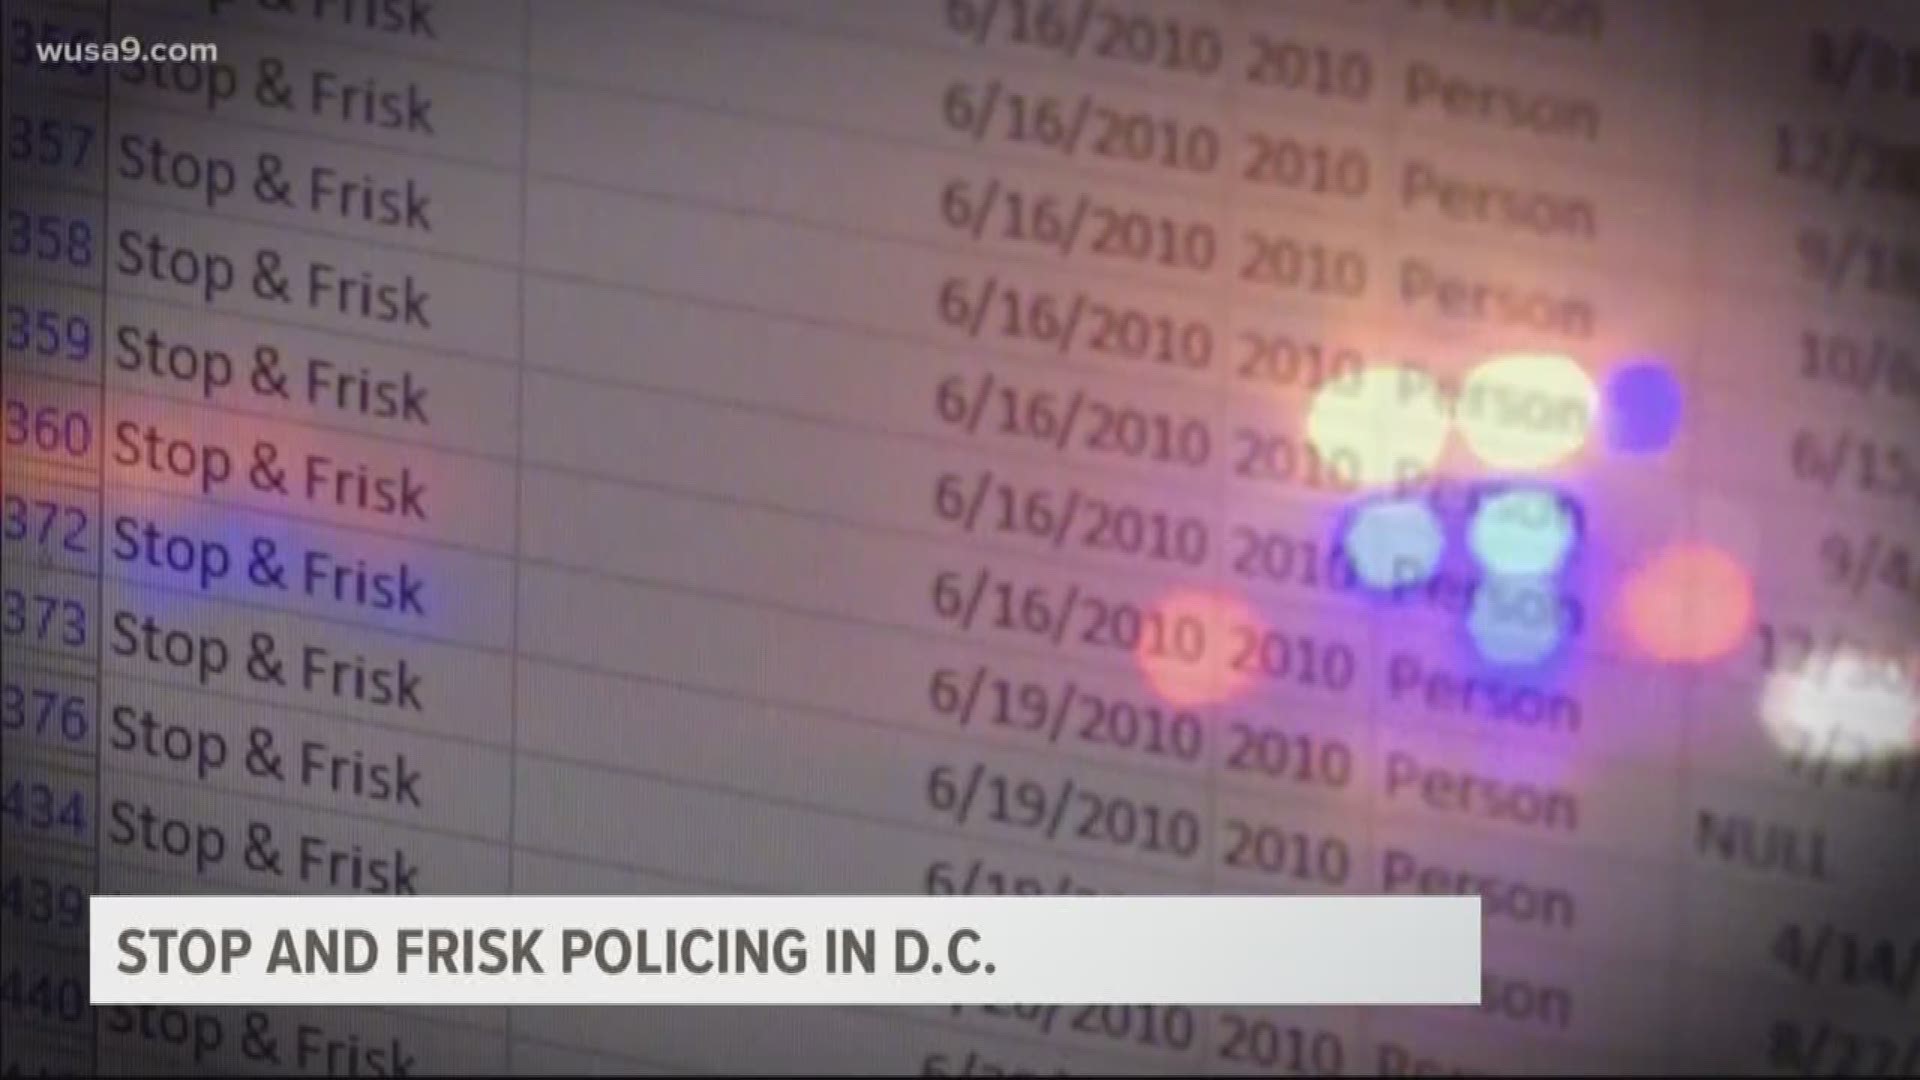 D.C. mayor Muriel Bowser, says it will take $500,000 to fund a new stop and frisk data collection system in the District.